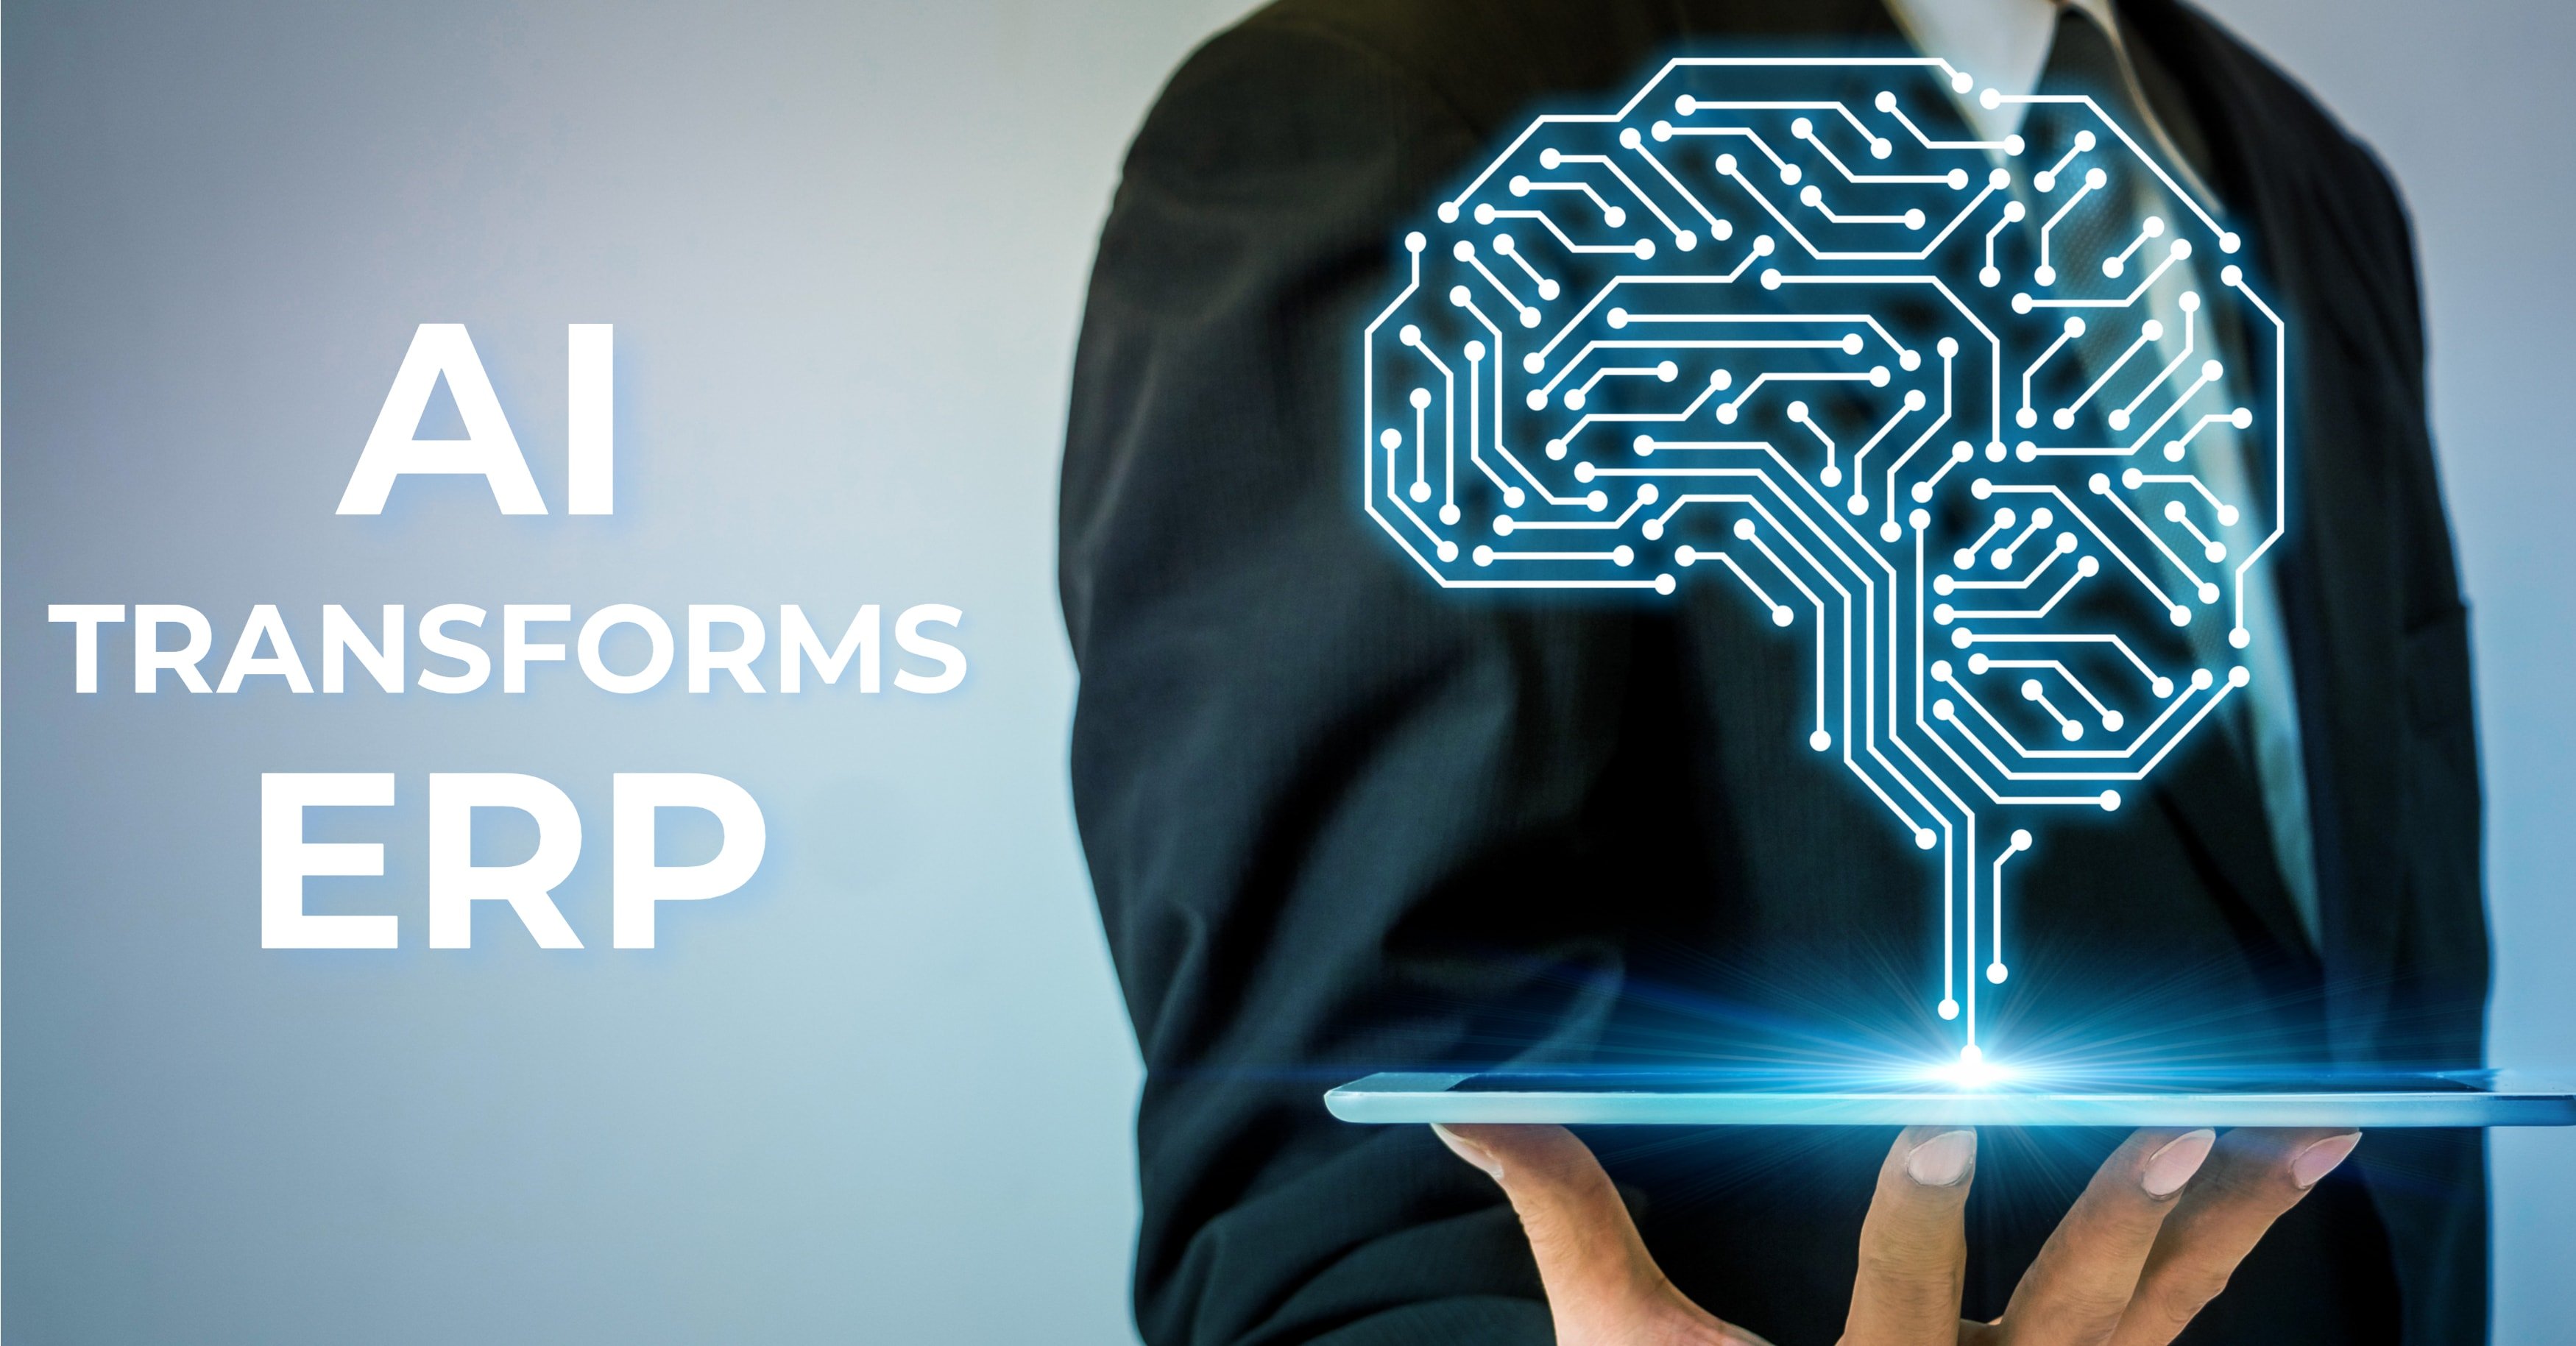 How is AI Transforming ERP?